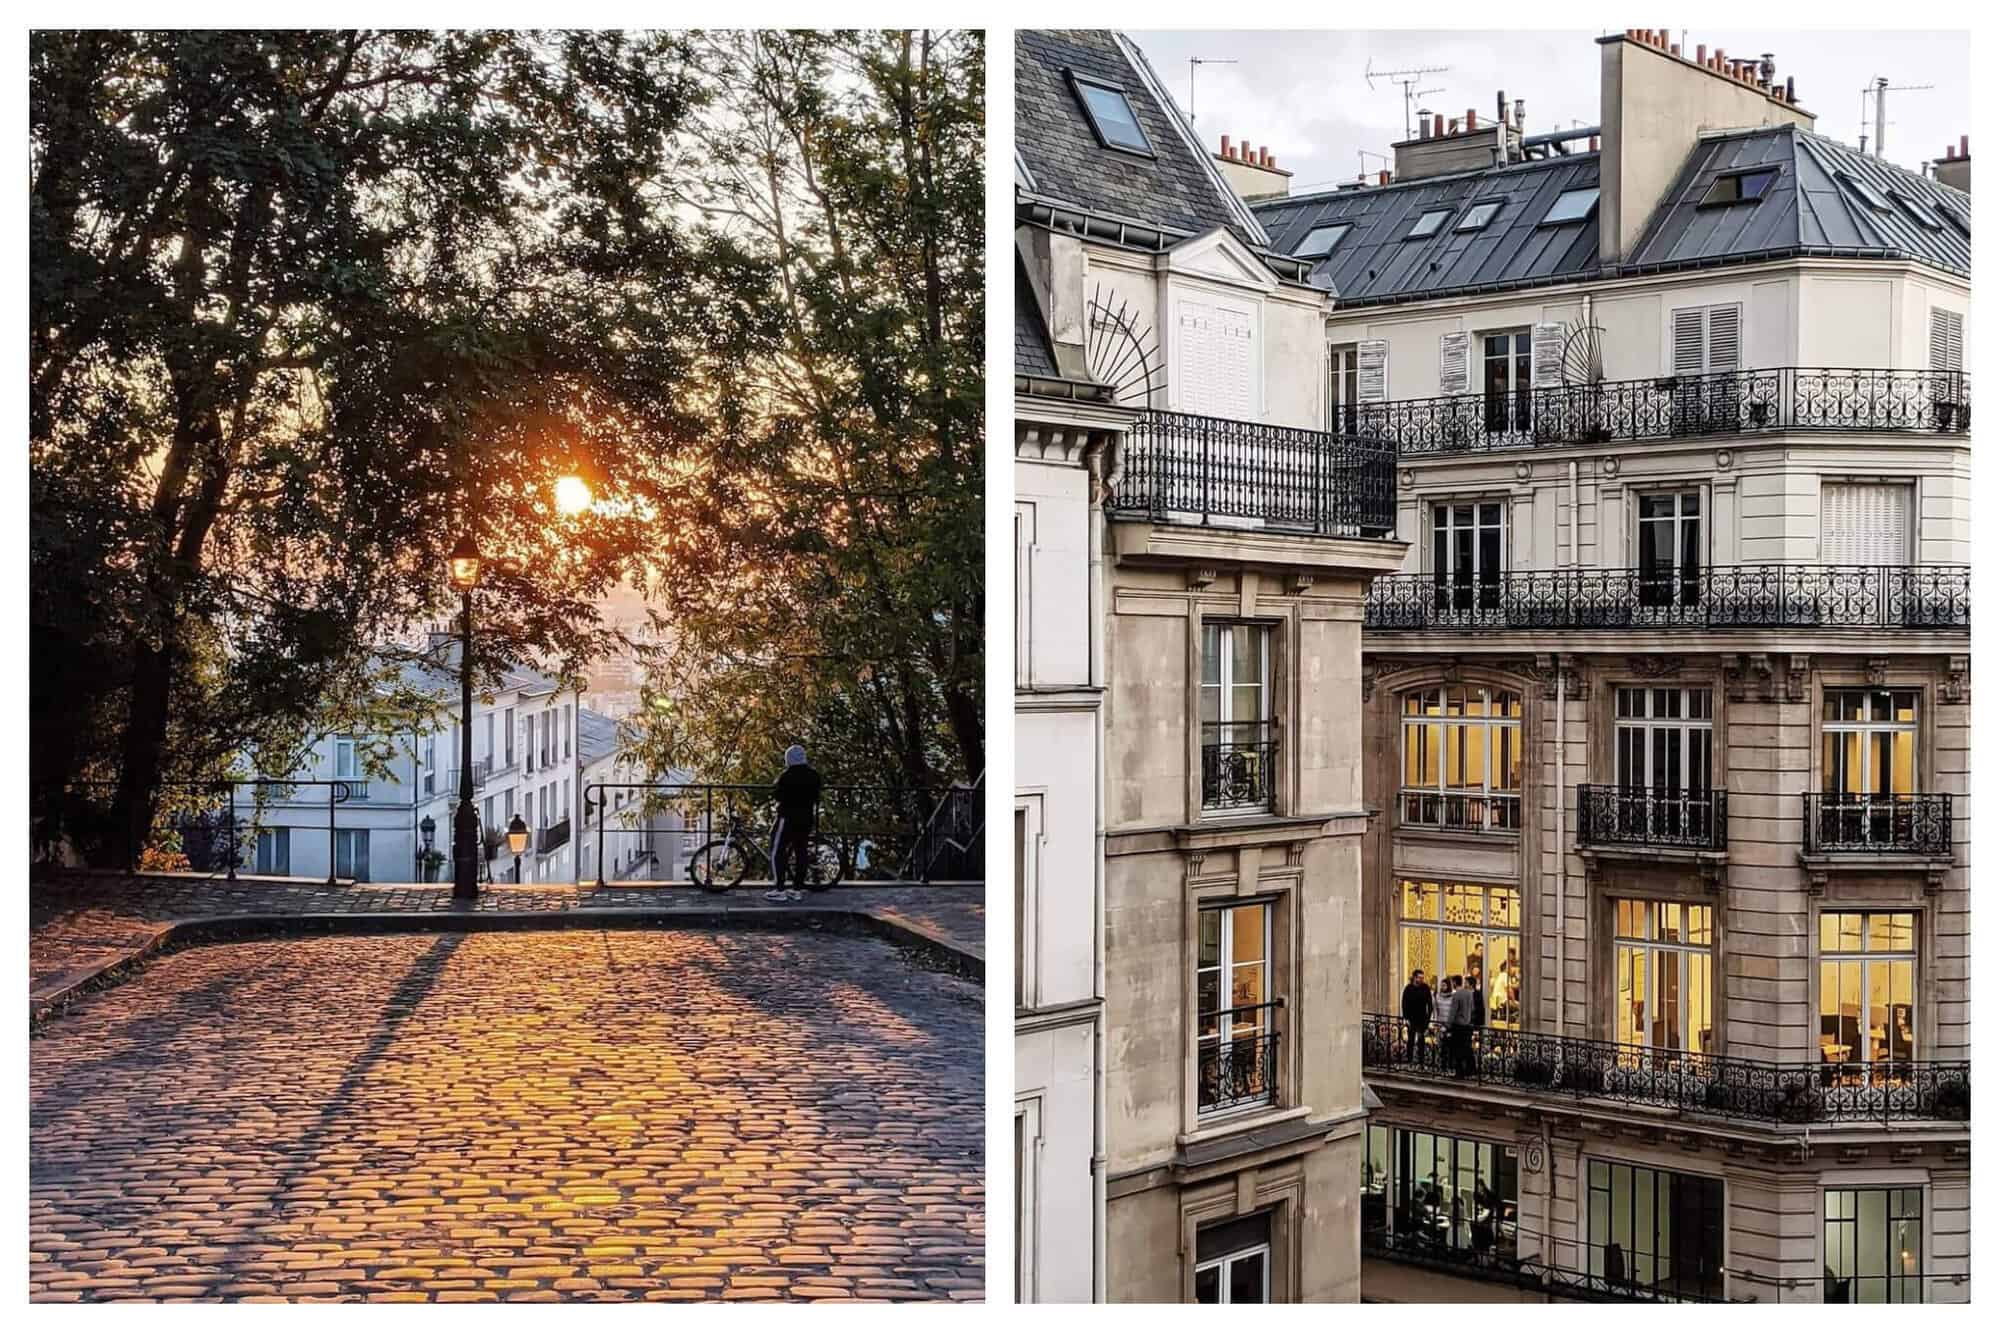 Left: the top of a set of stairs in the Parisian neighborhood Montmartre at sunset. There is an oid-fashioned lamp post visible at the top of the stairs and there are trees coming up over the stairs. The streets are cobblestoned. The sun is shining brightly through the leaves of the trees. Right: apartment buildings in Paris. The buildings are white stone and each floor has a small balcony. There are people visible inside some of the apartments.